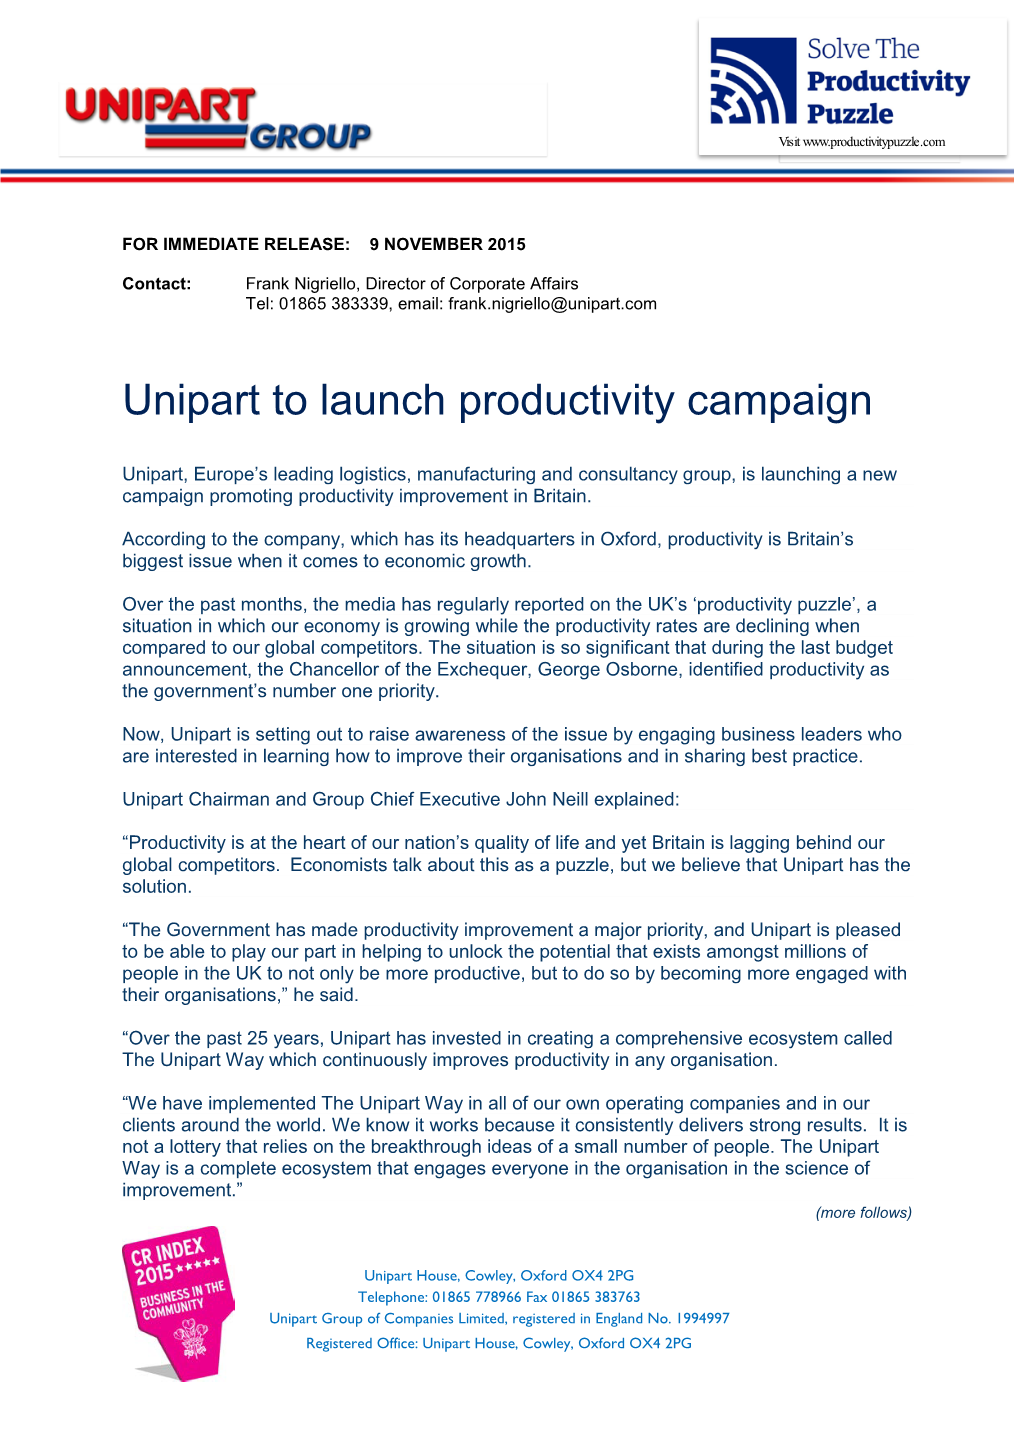 Unipart to Launch Productivity Campaign